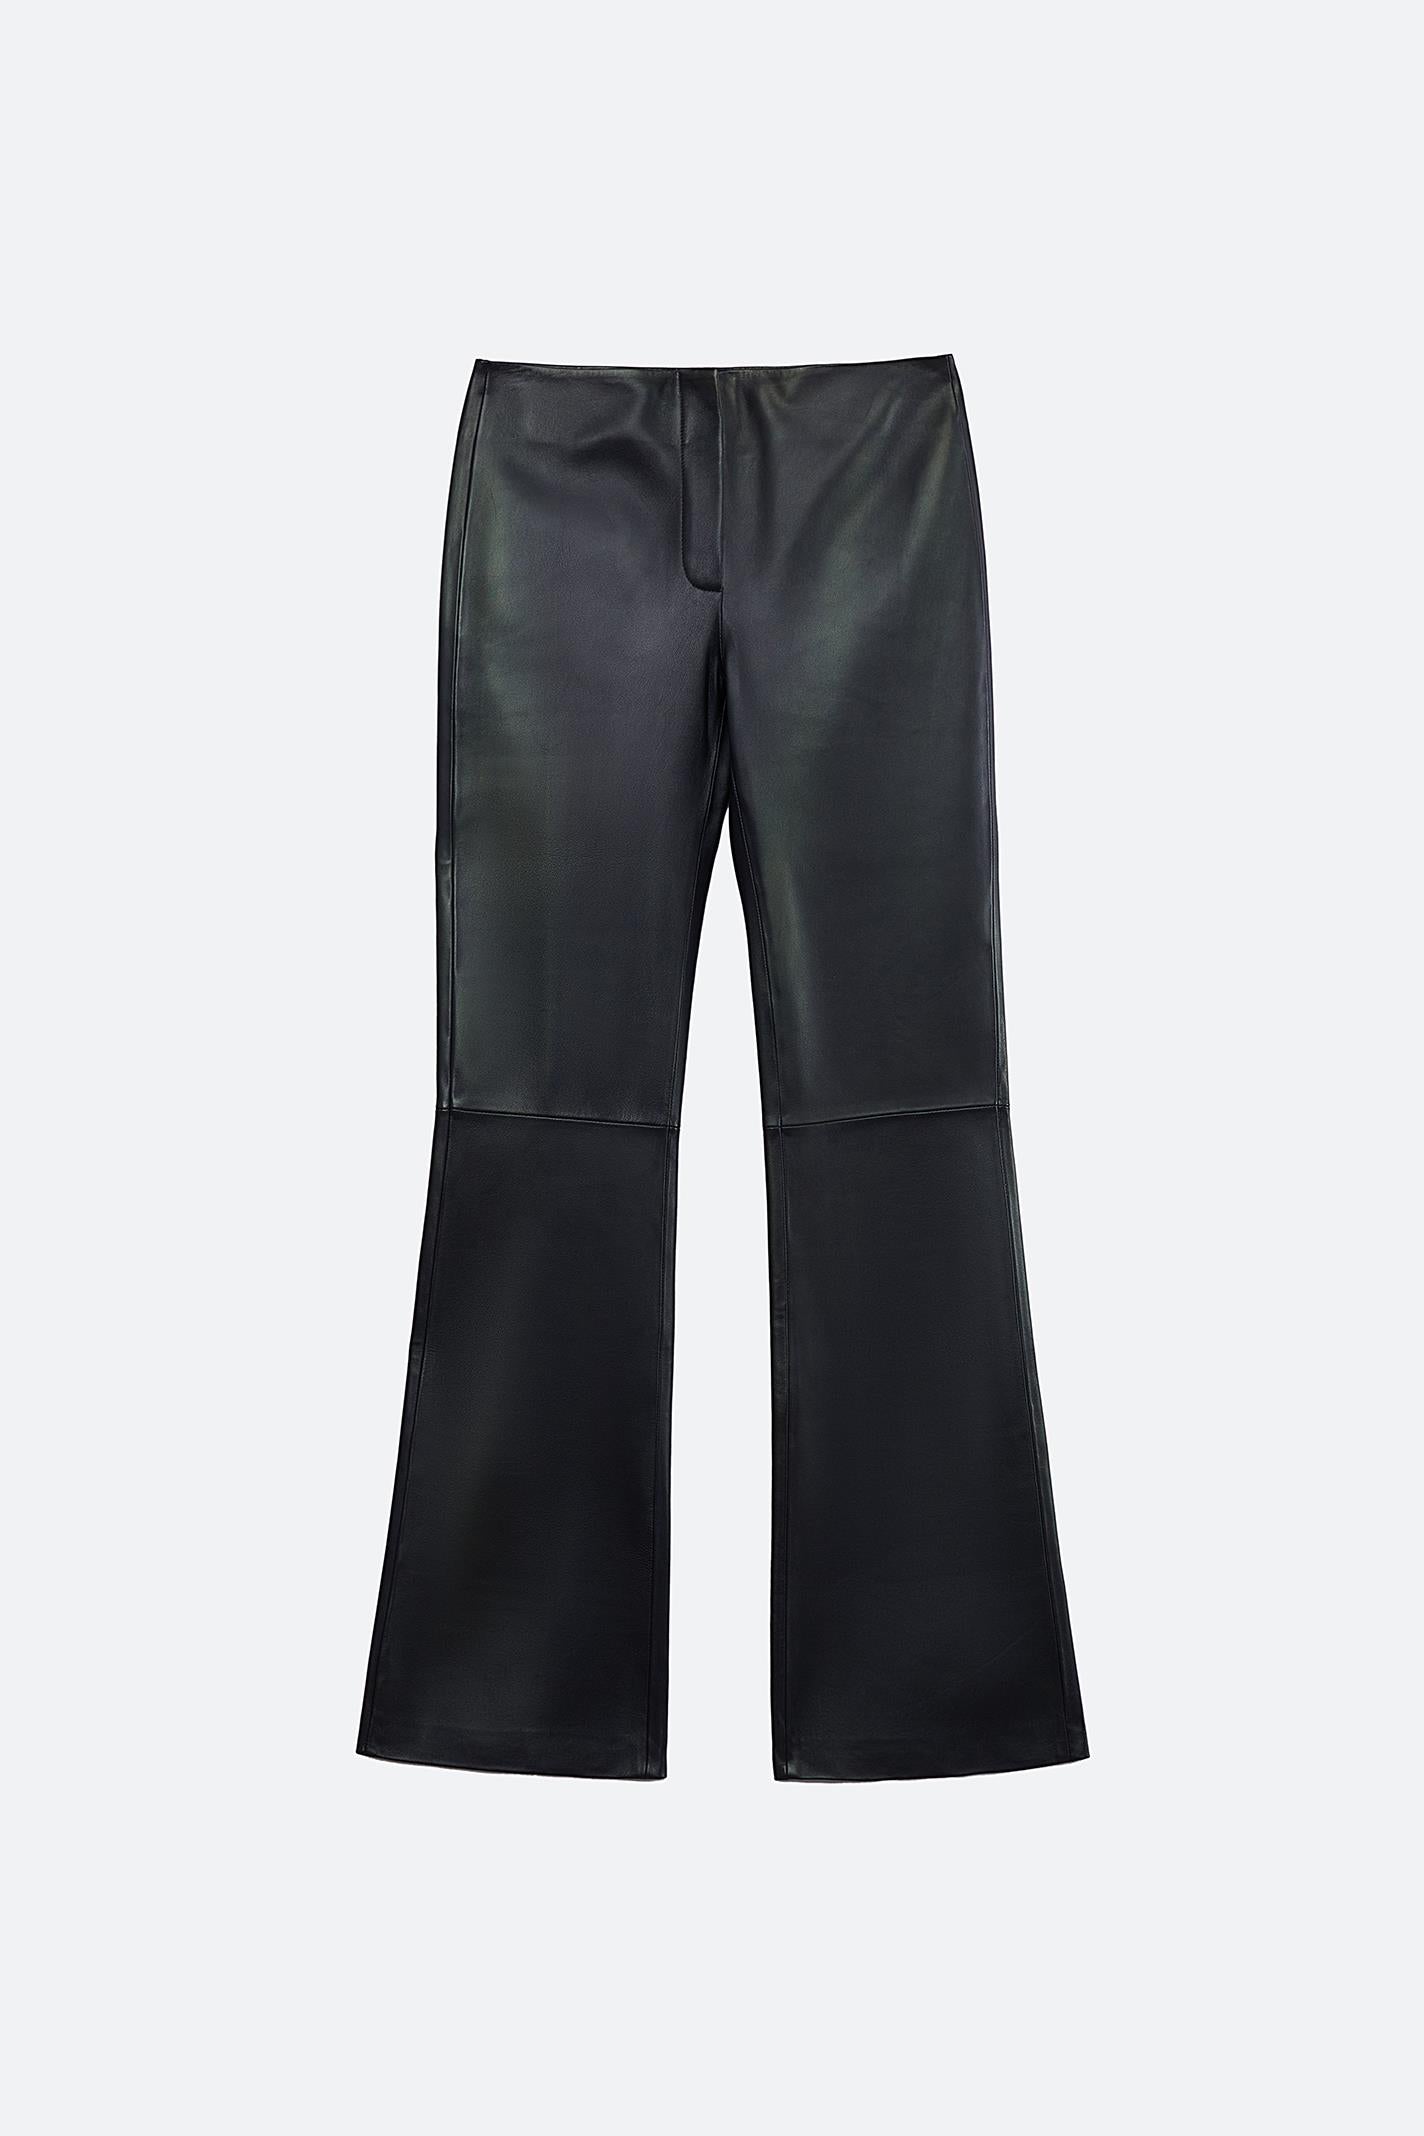 LEATHER PANT 202